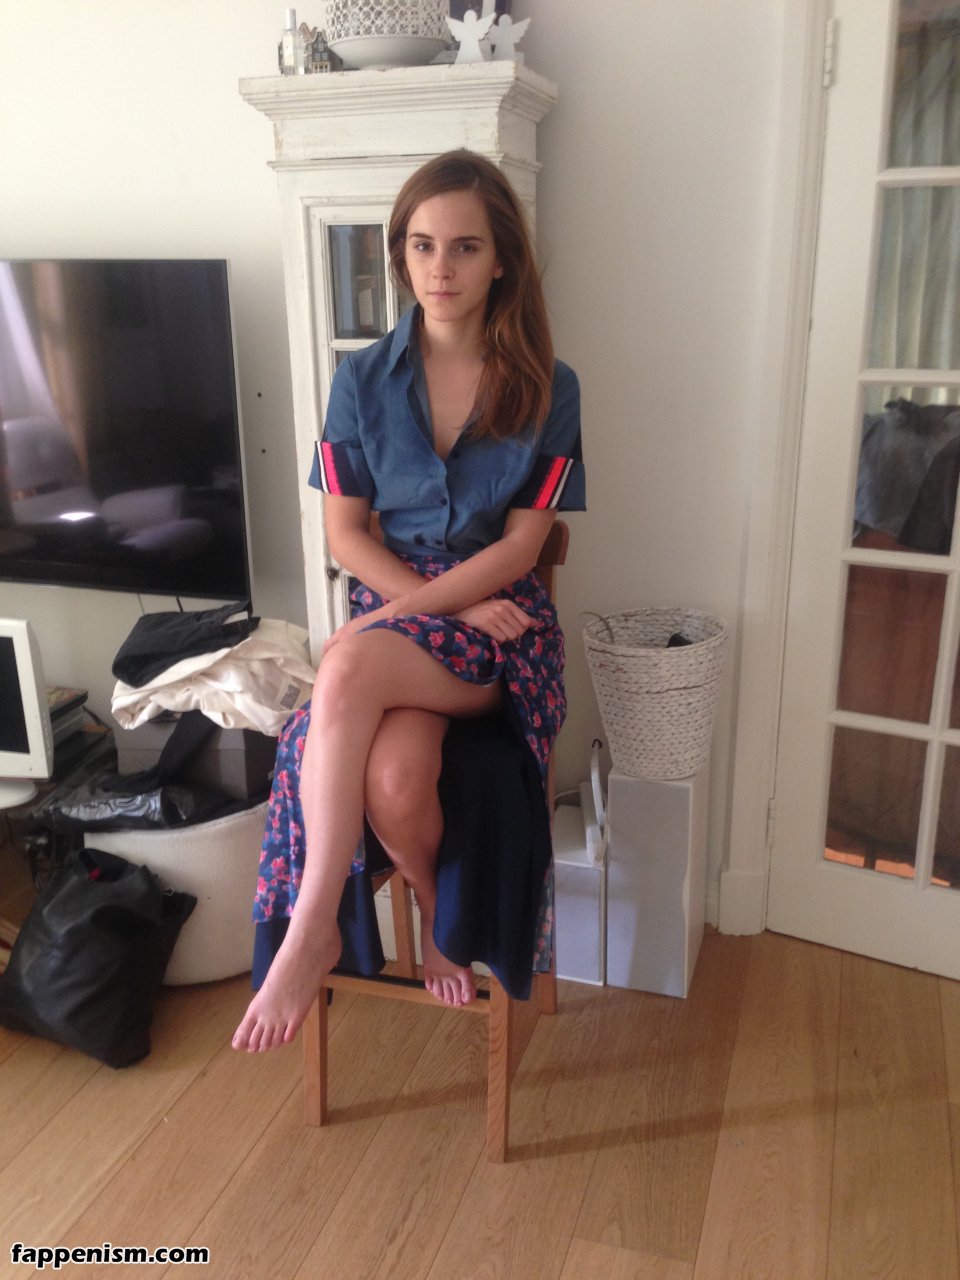 emma watson nude pictures leaked exclusive the fappening youtube - XXXPicz